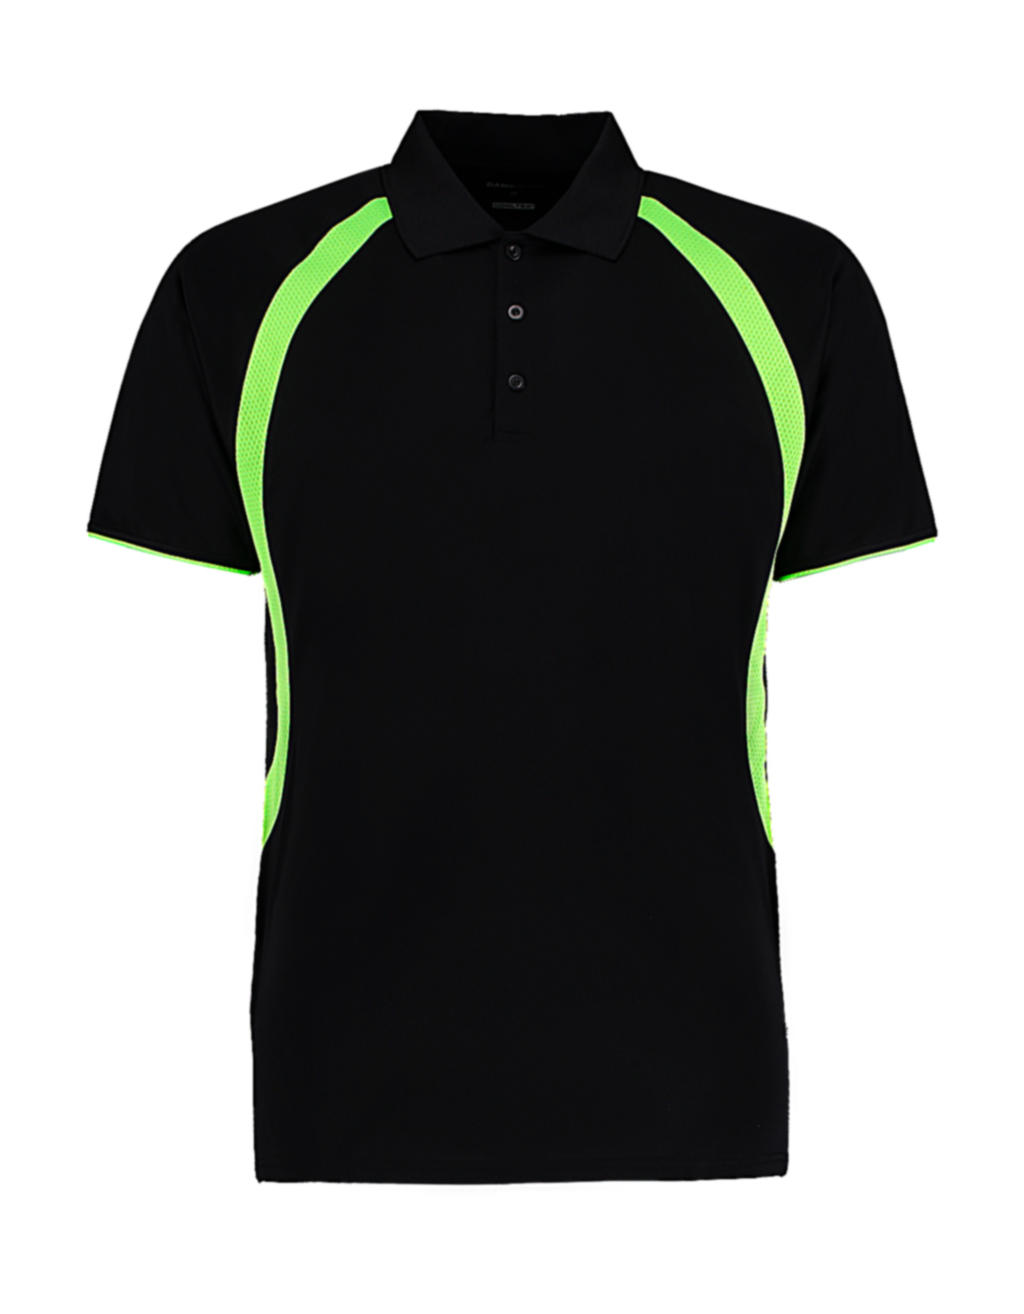 550.11 / Classic Fit Cooltex® Riviera Polo Shirt / Black/Fluorescent Lime